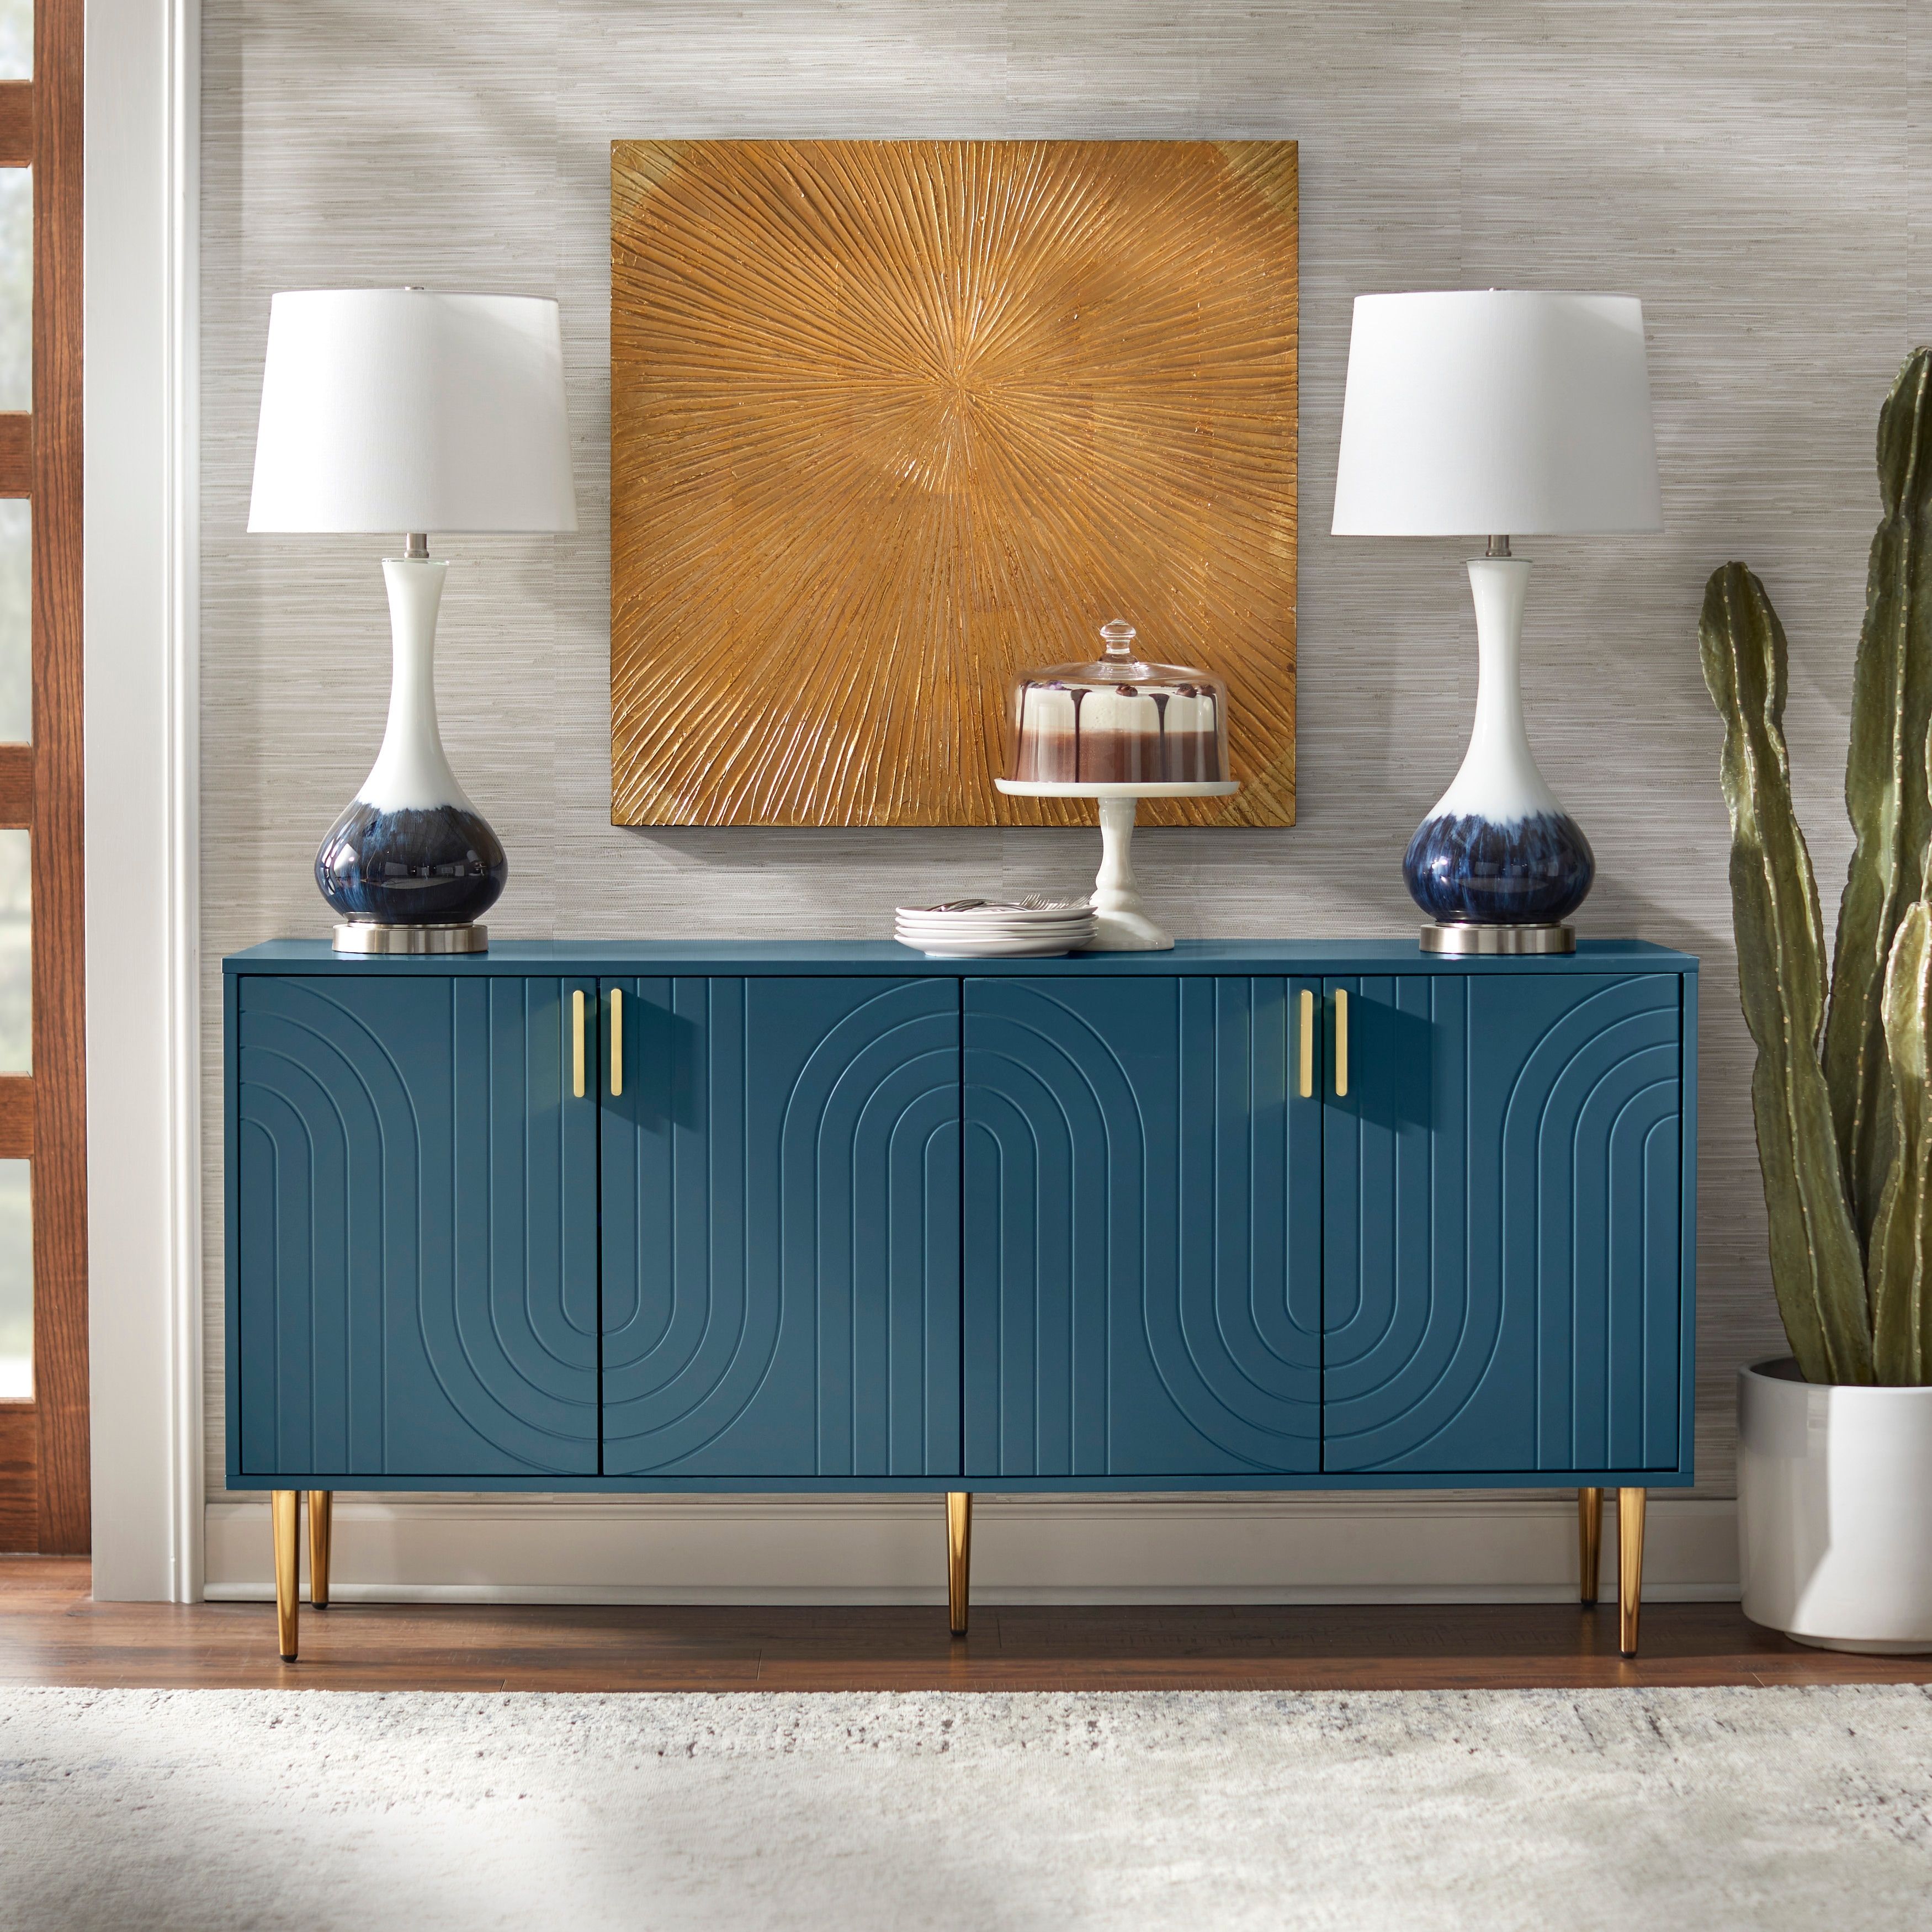 Lifestorey Tabaria Mid Century Four Door Sideboard/buffet – On Sale – Bed  Bath & Beyond – 34667955 Pertaining To Most Recent Buffet Cabinet Sideboards (View 13 of 15)